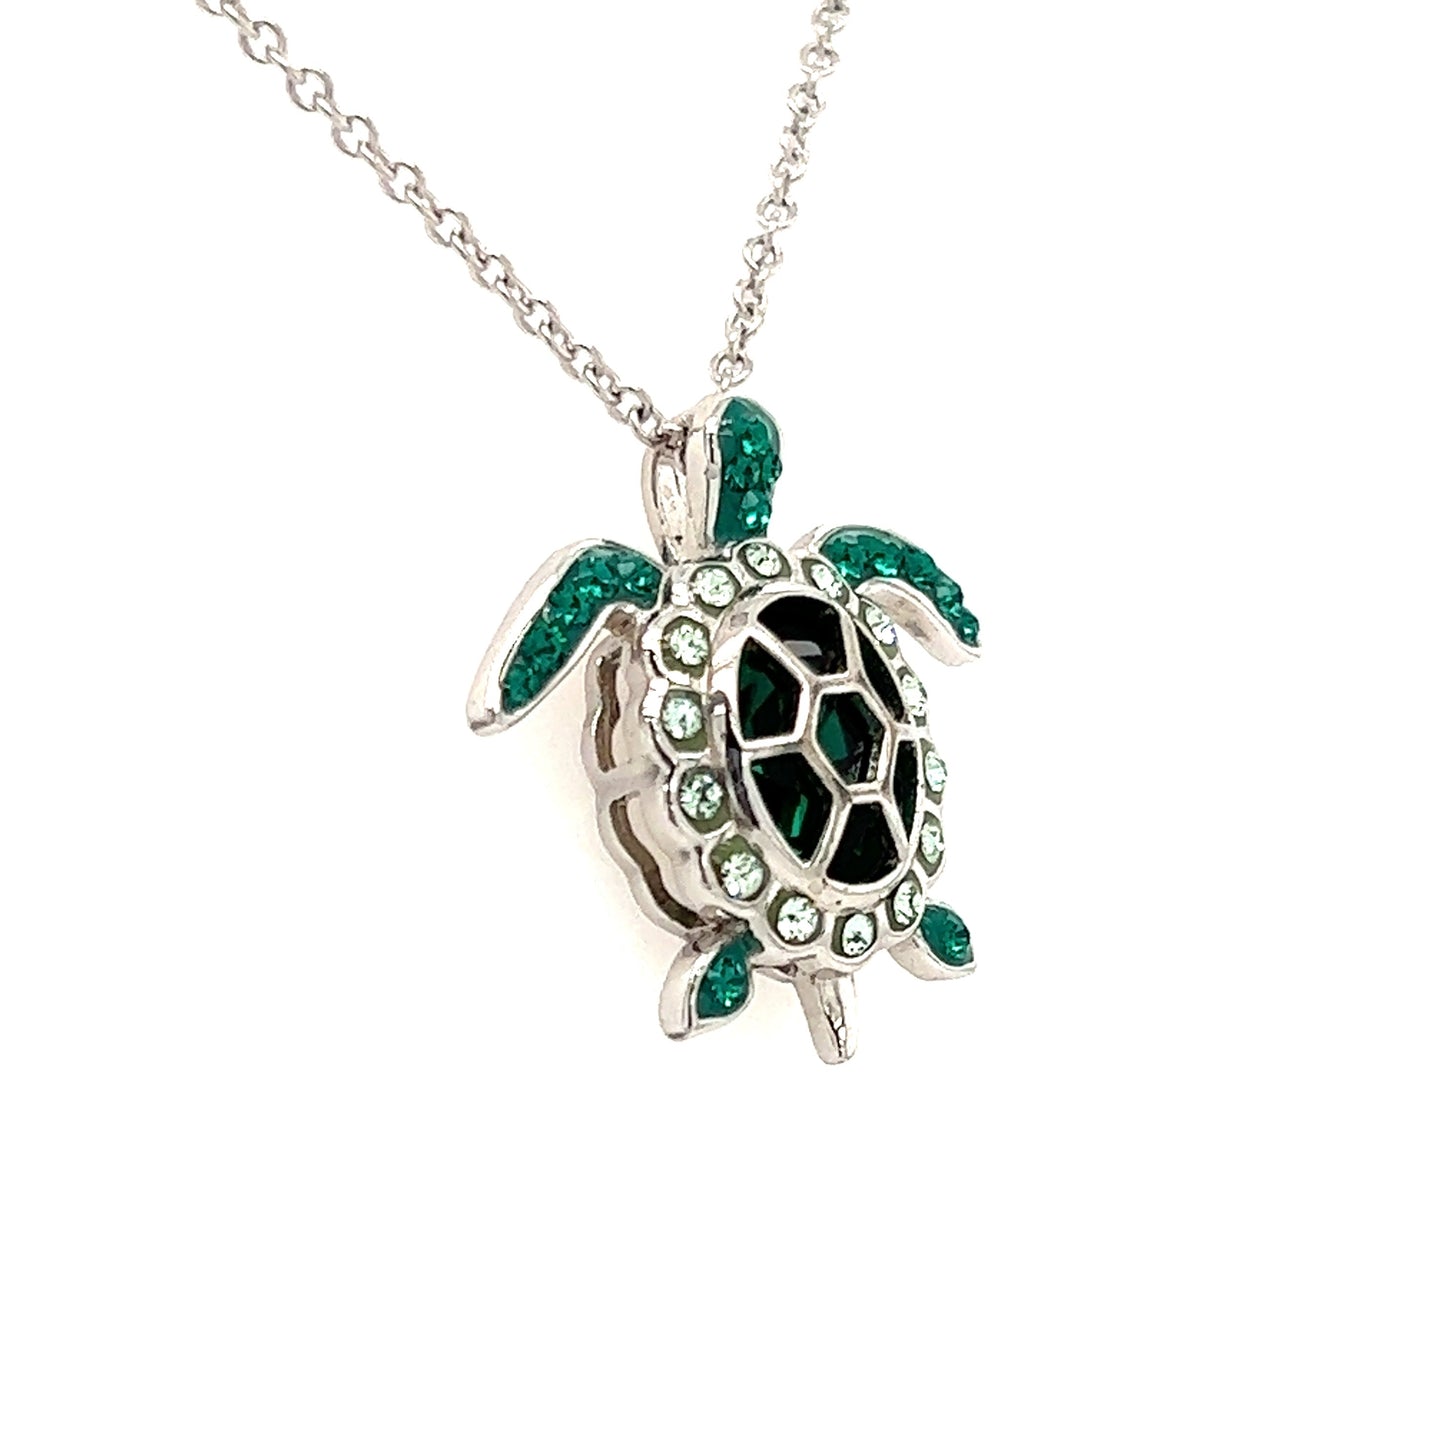 Sea Turtle Necklace with Deep Green Crystals in Sterling Silver. Left Side View